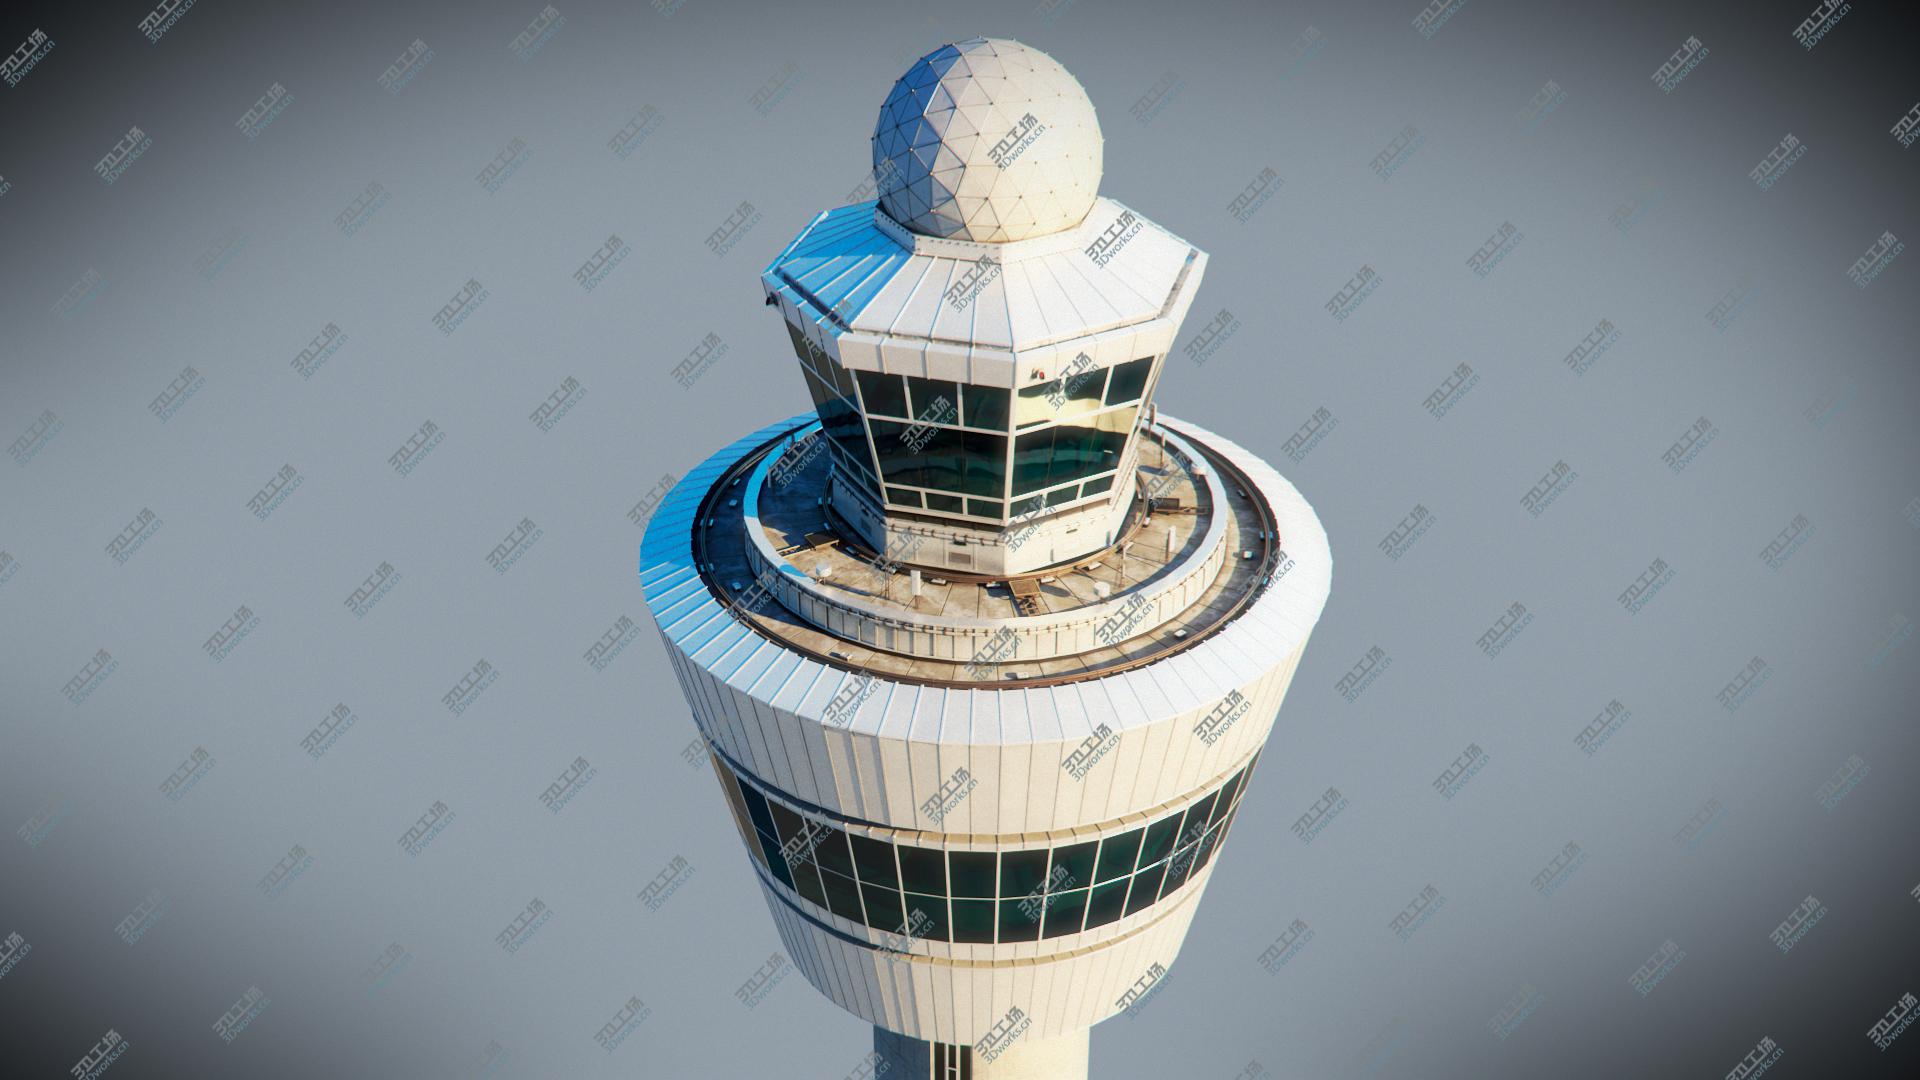 images/goods_img/2021040161/3D Airport Control Tower Amsterdam model/5.jpg